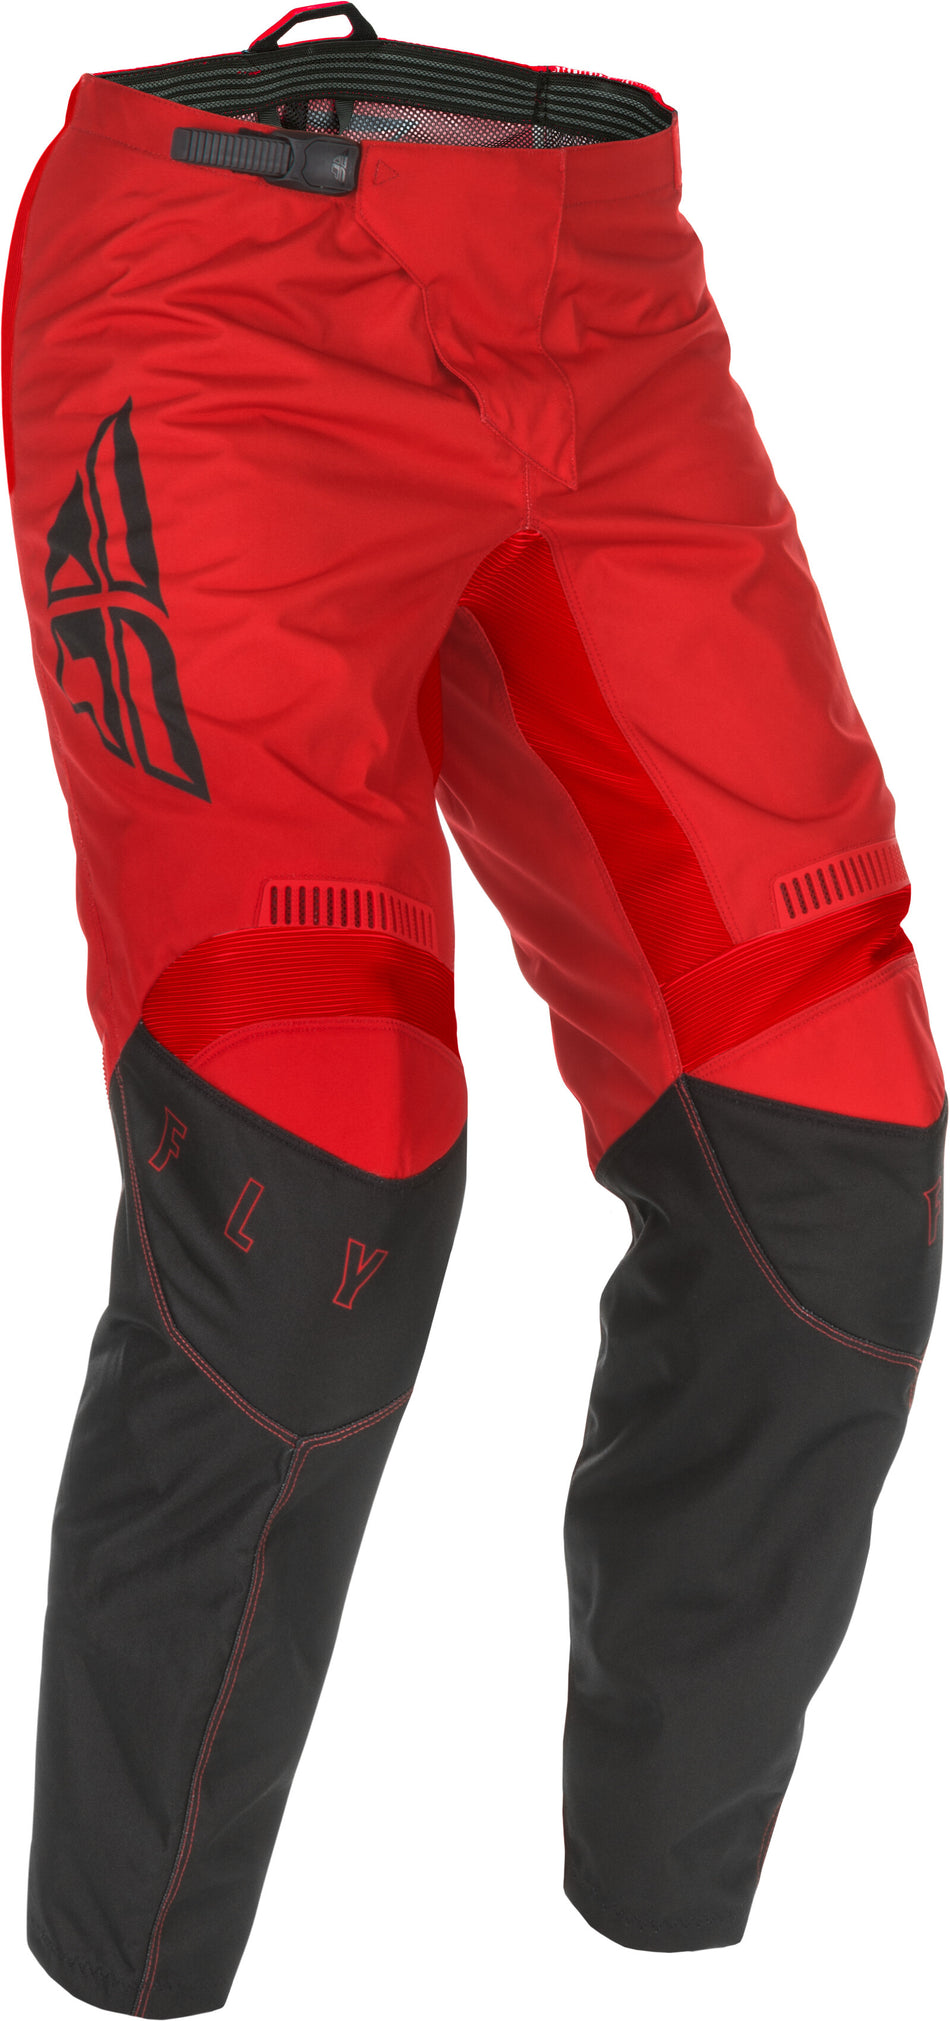 FLY RACING Youth F-16 Pants Red/Black Sz 18 374-93218